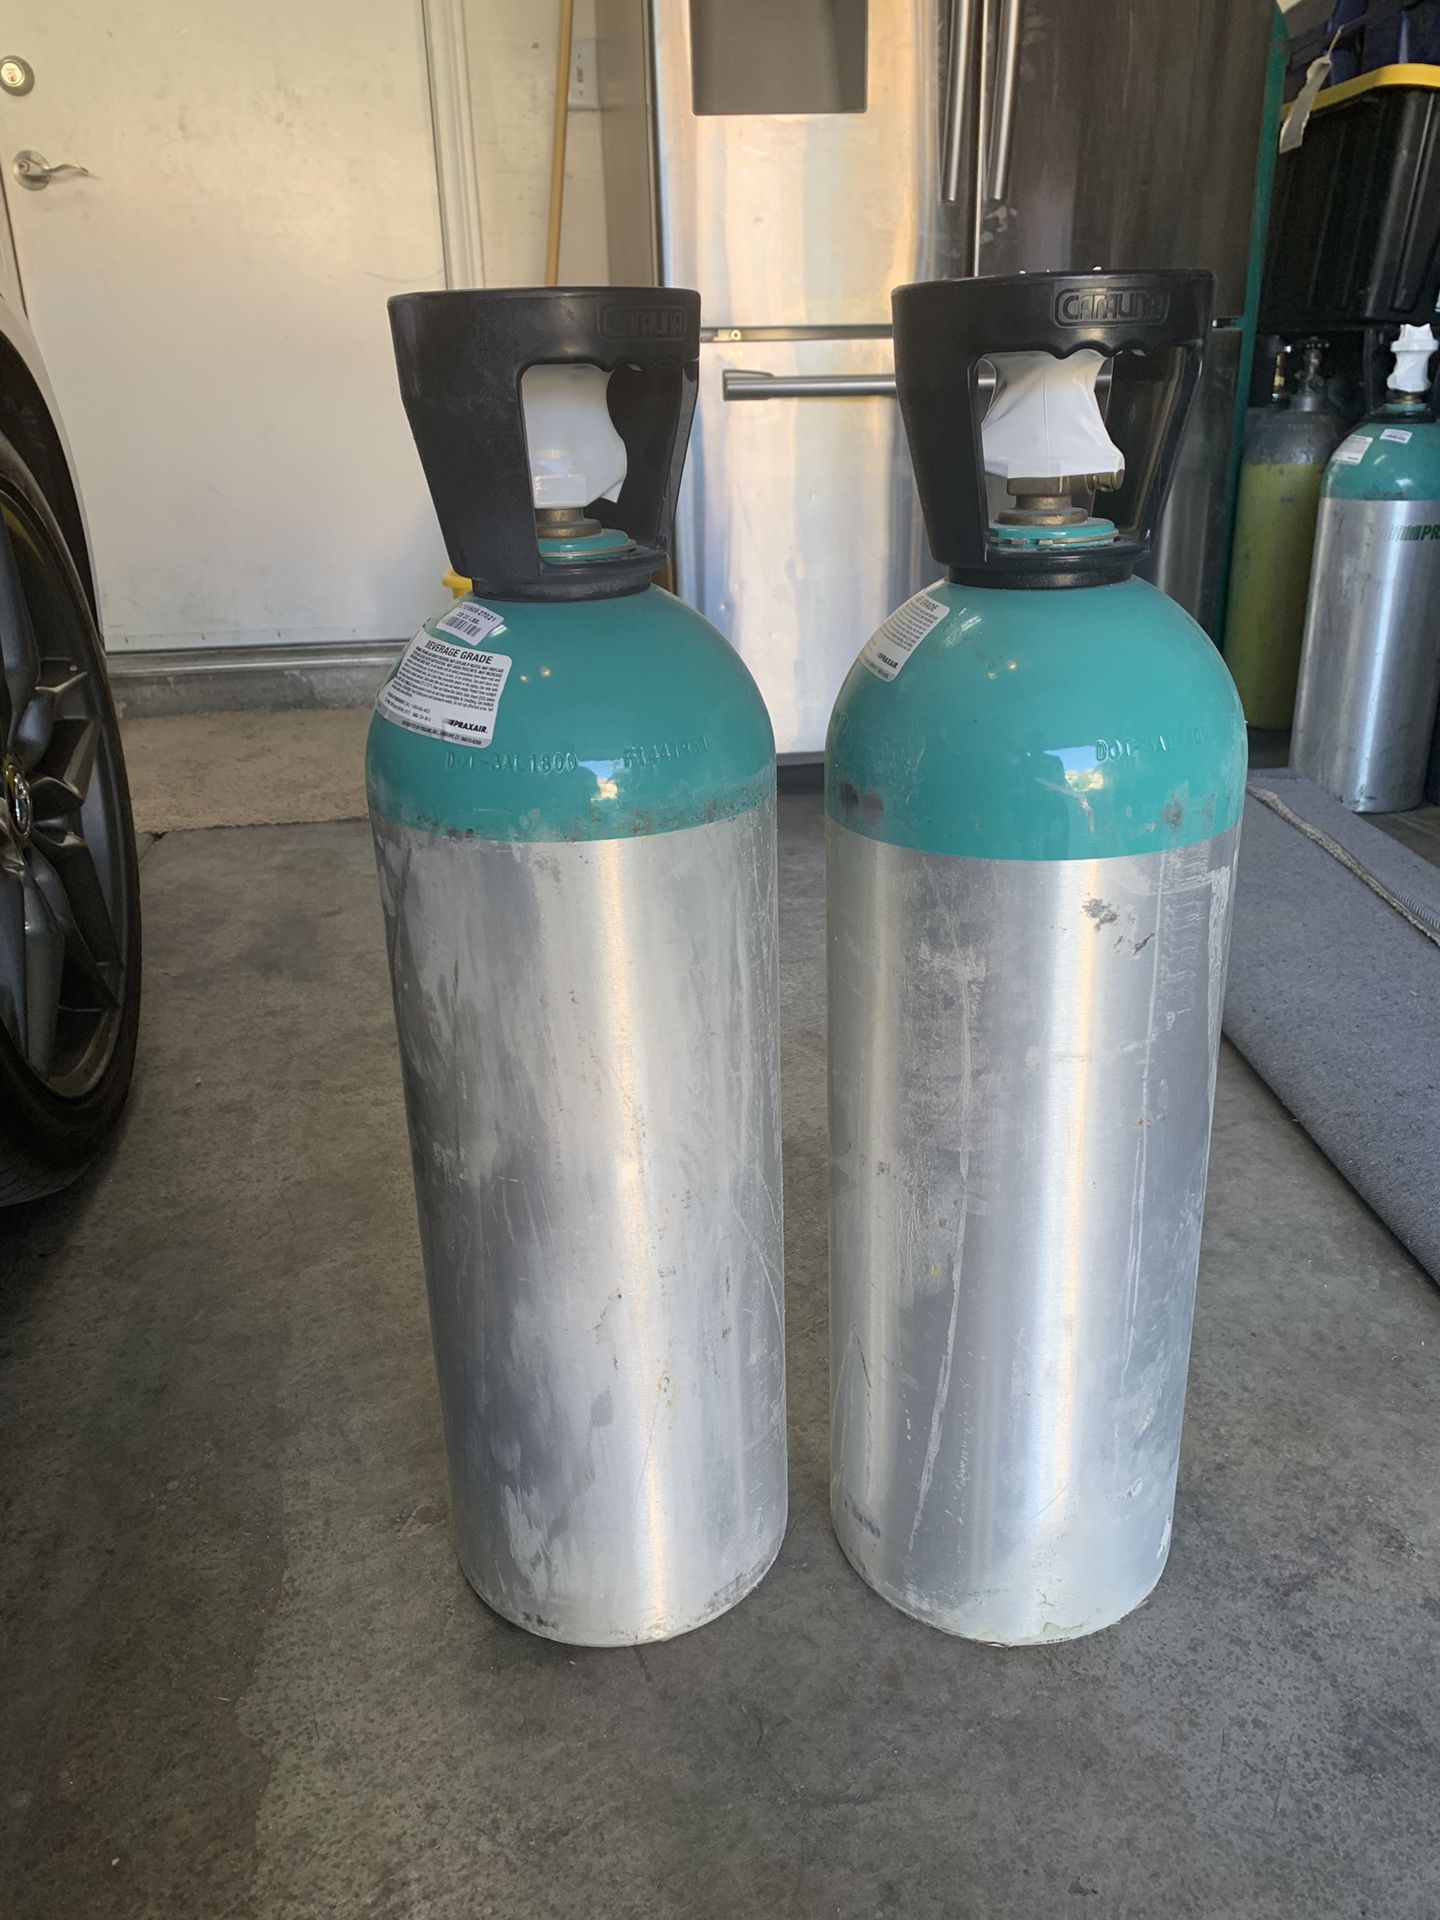 20 lb Co2 aluminum tanks... Full and hydro test current